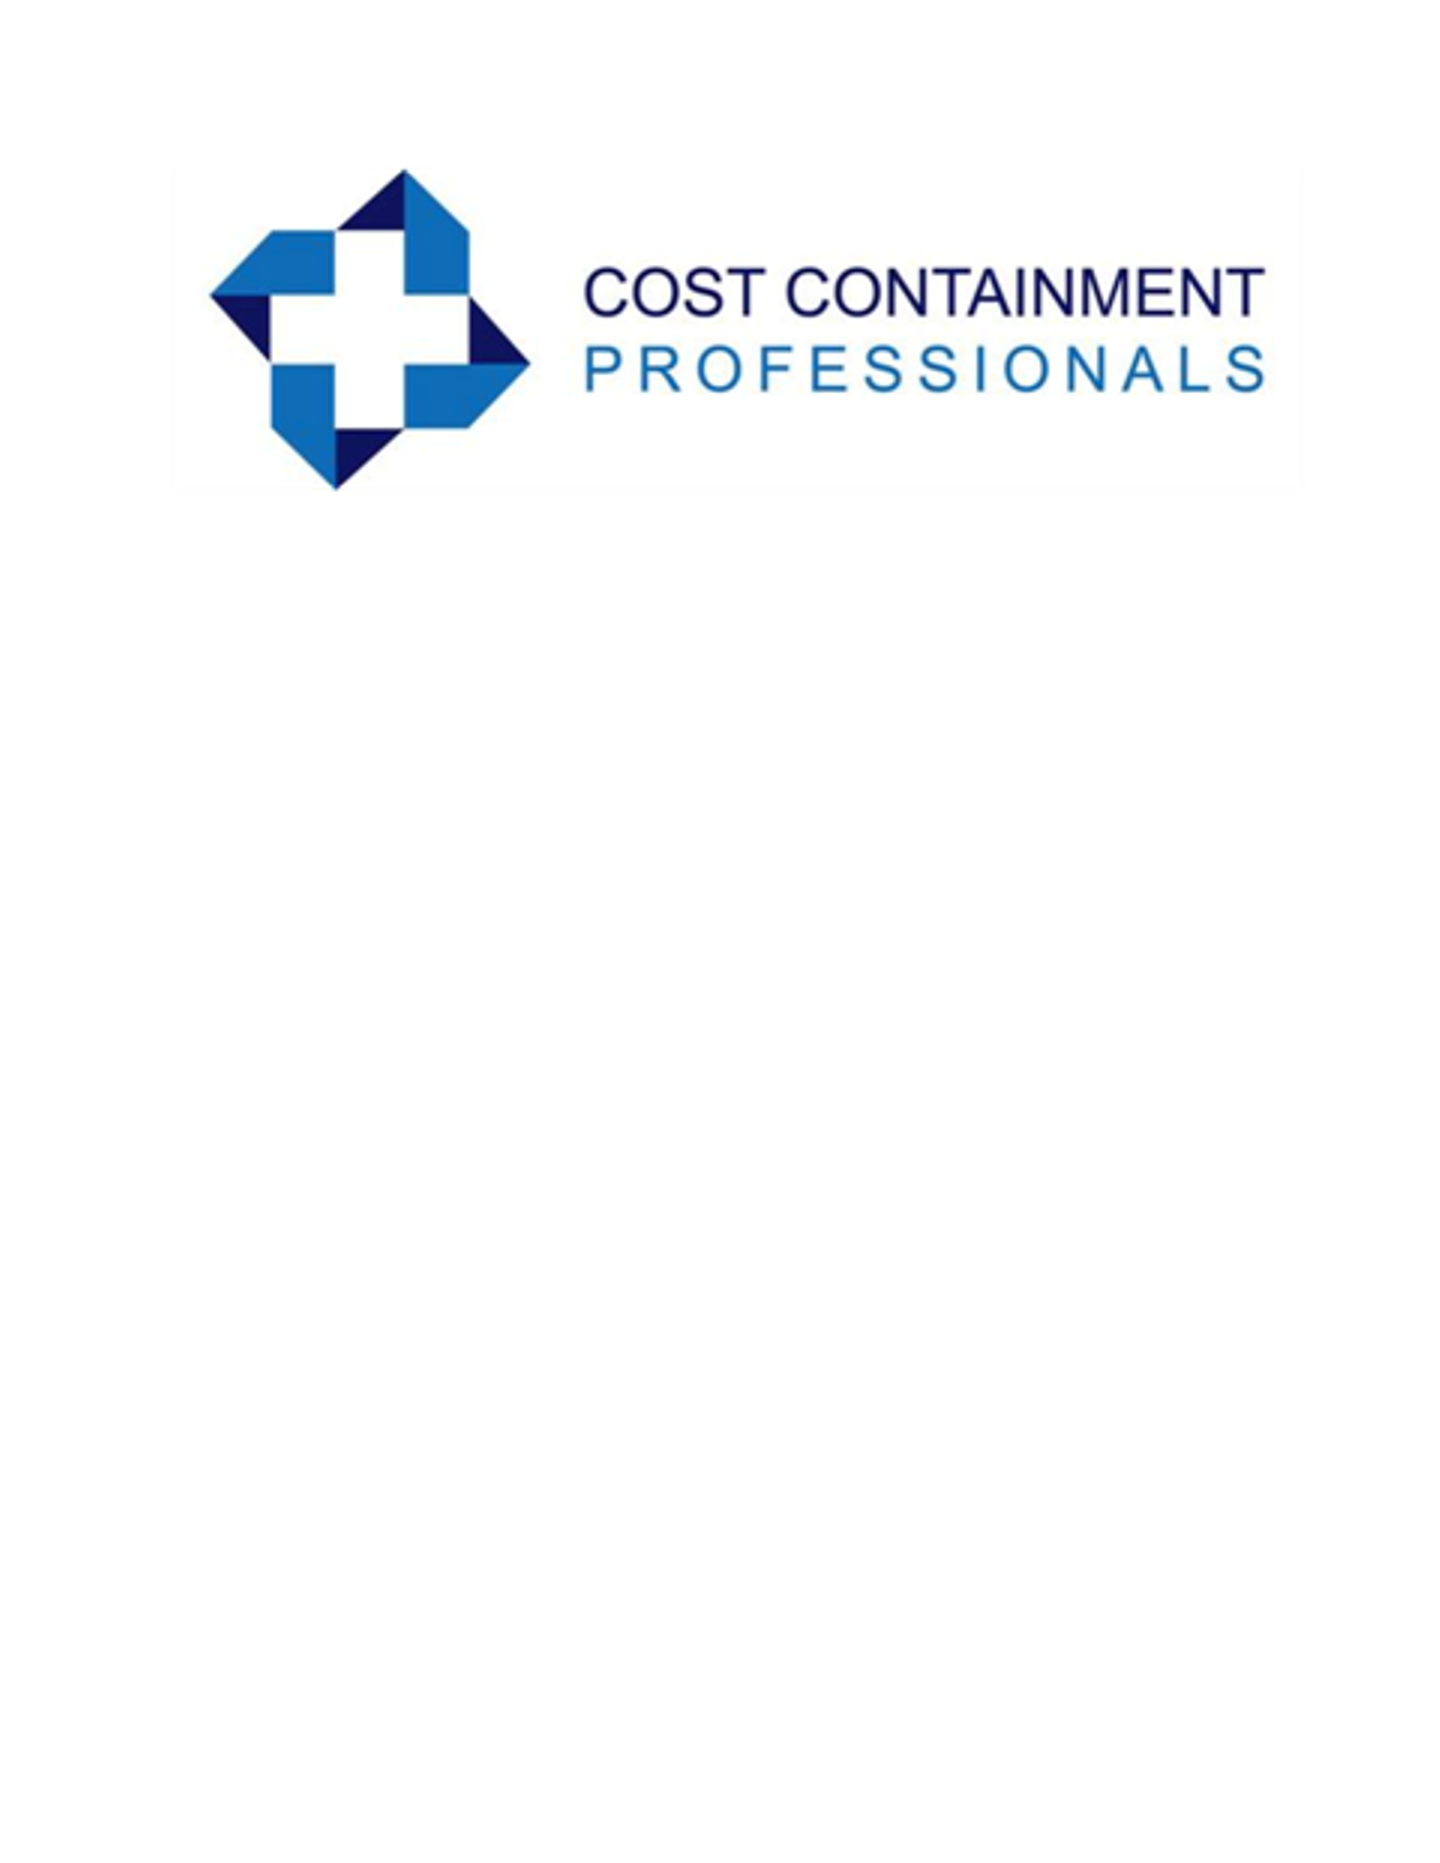 Cost-Containment Professionals - Medical Claim Review & Administration Support Services